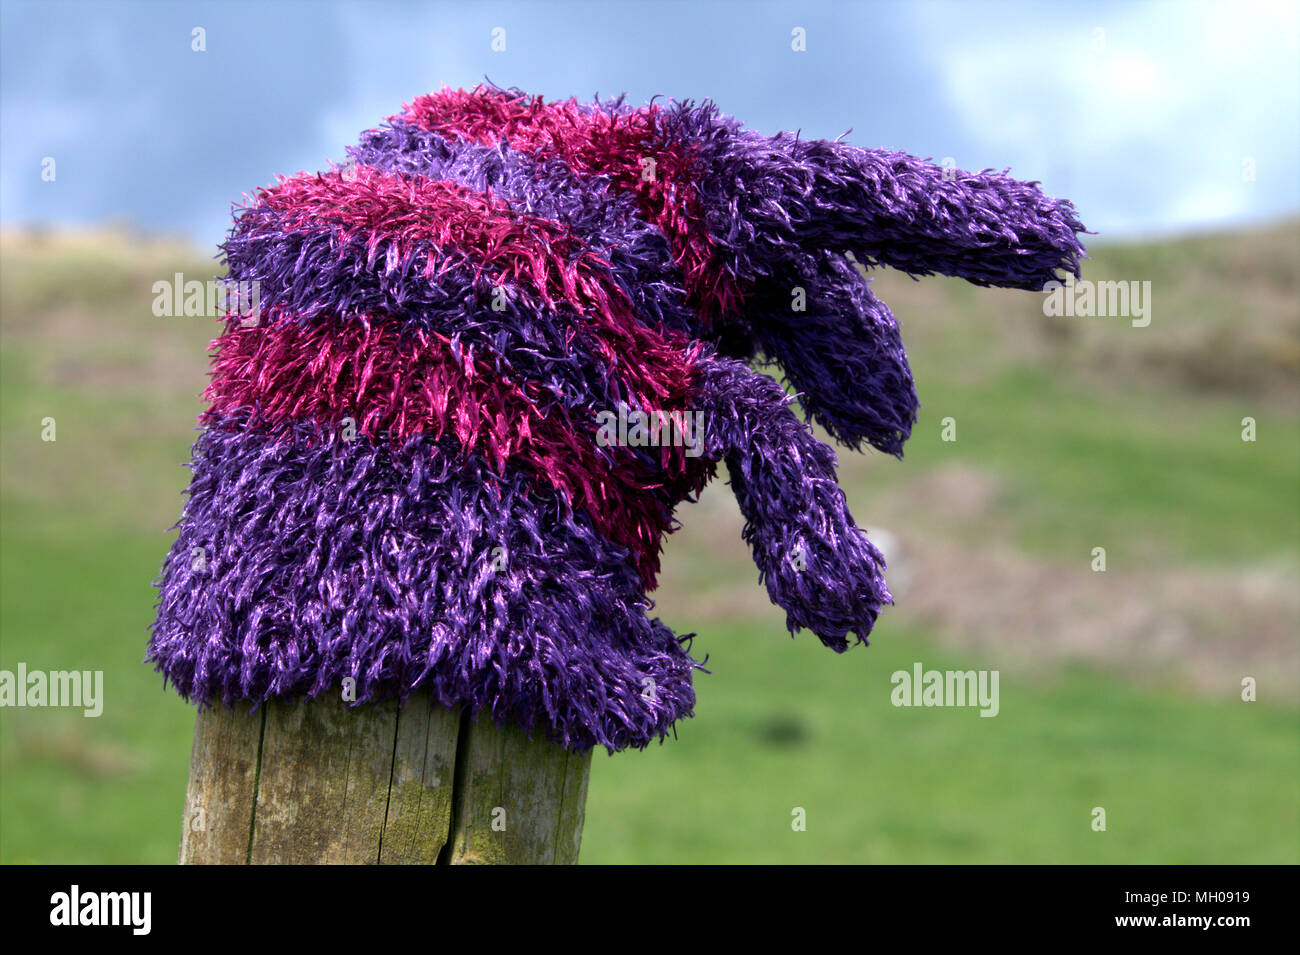 lost purple and pink striped woollen glove pulled over the top of a farm fence post. Stock Photo